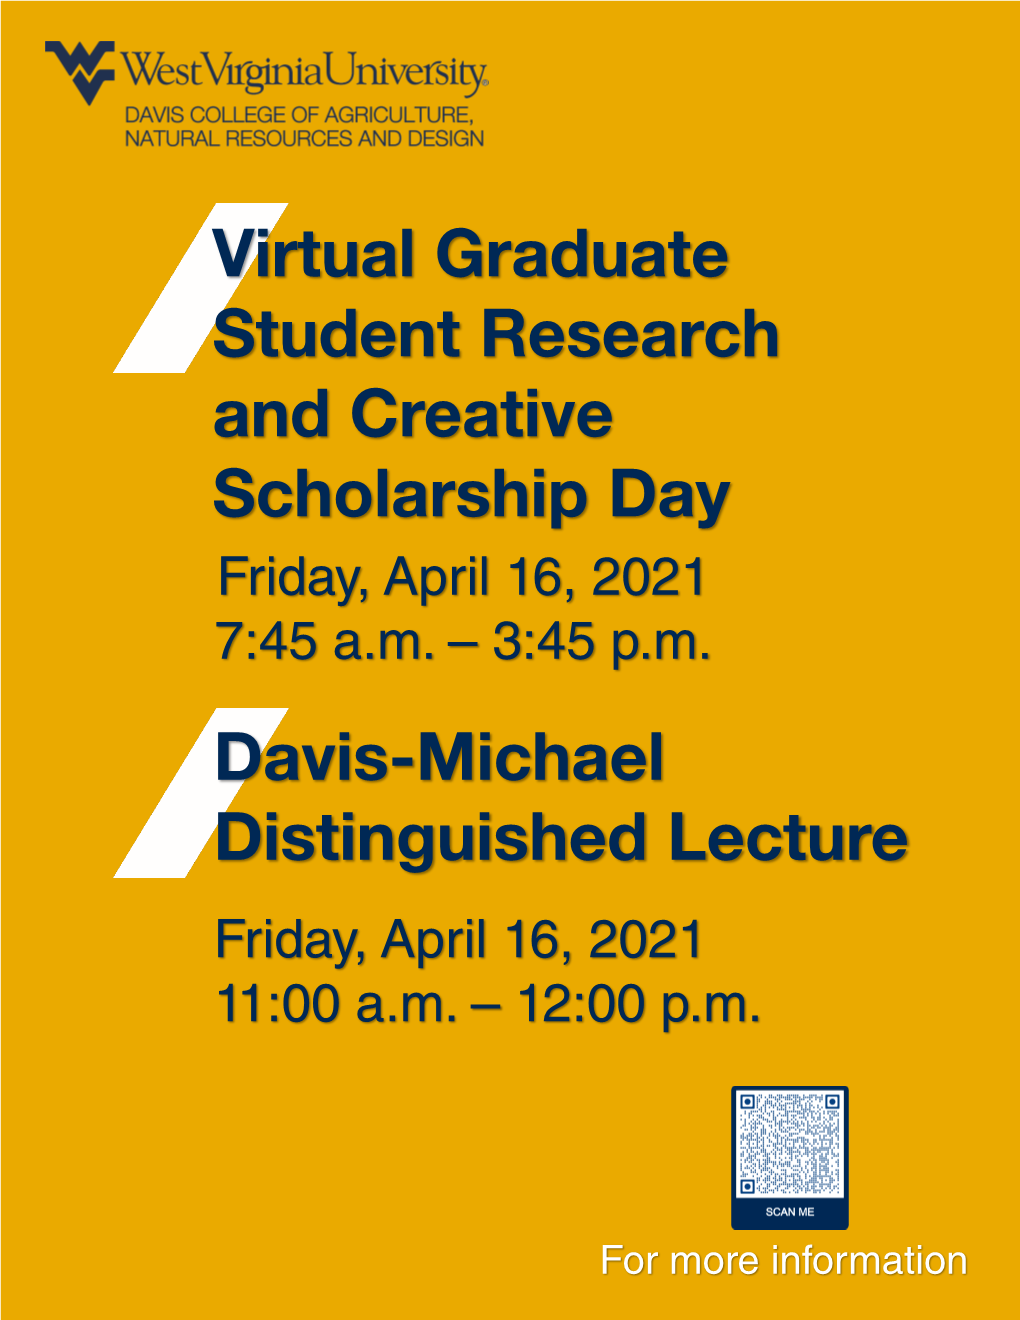 Virtual Graduate Student Research and Creative Scholarship Day Friday, April 16, 2021 7:45 A.M